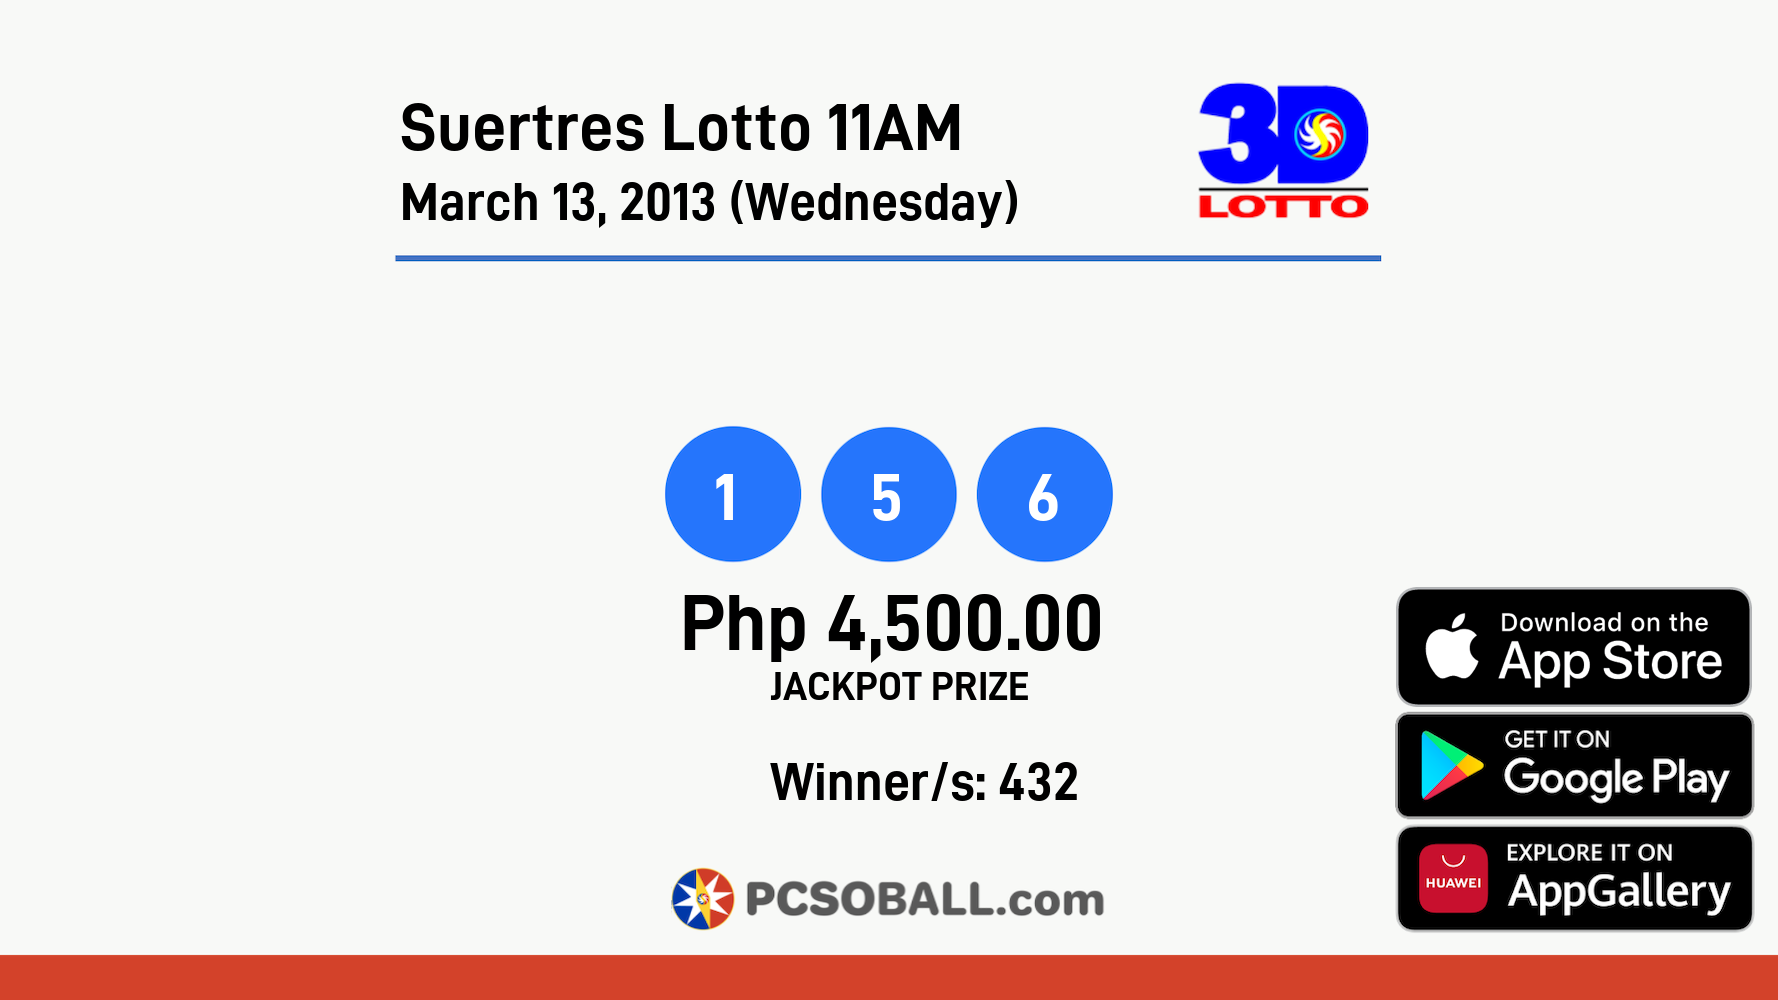 Suertres Lotto 11AM March 13, 2013 (Wednesday) Result